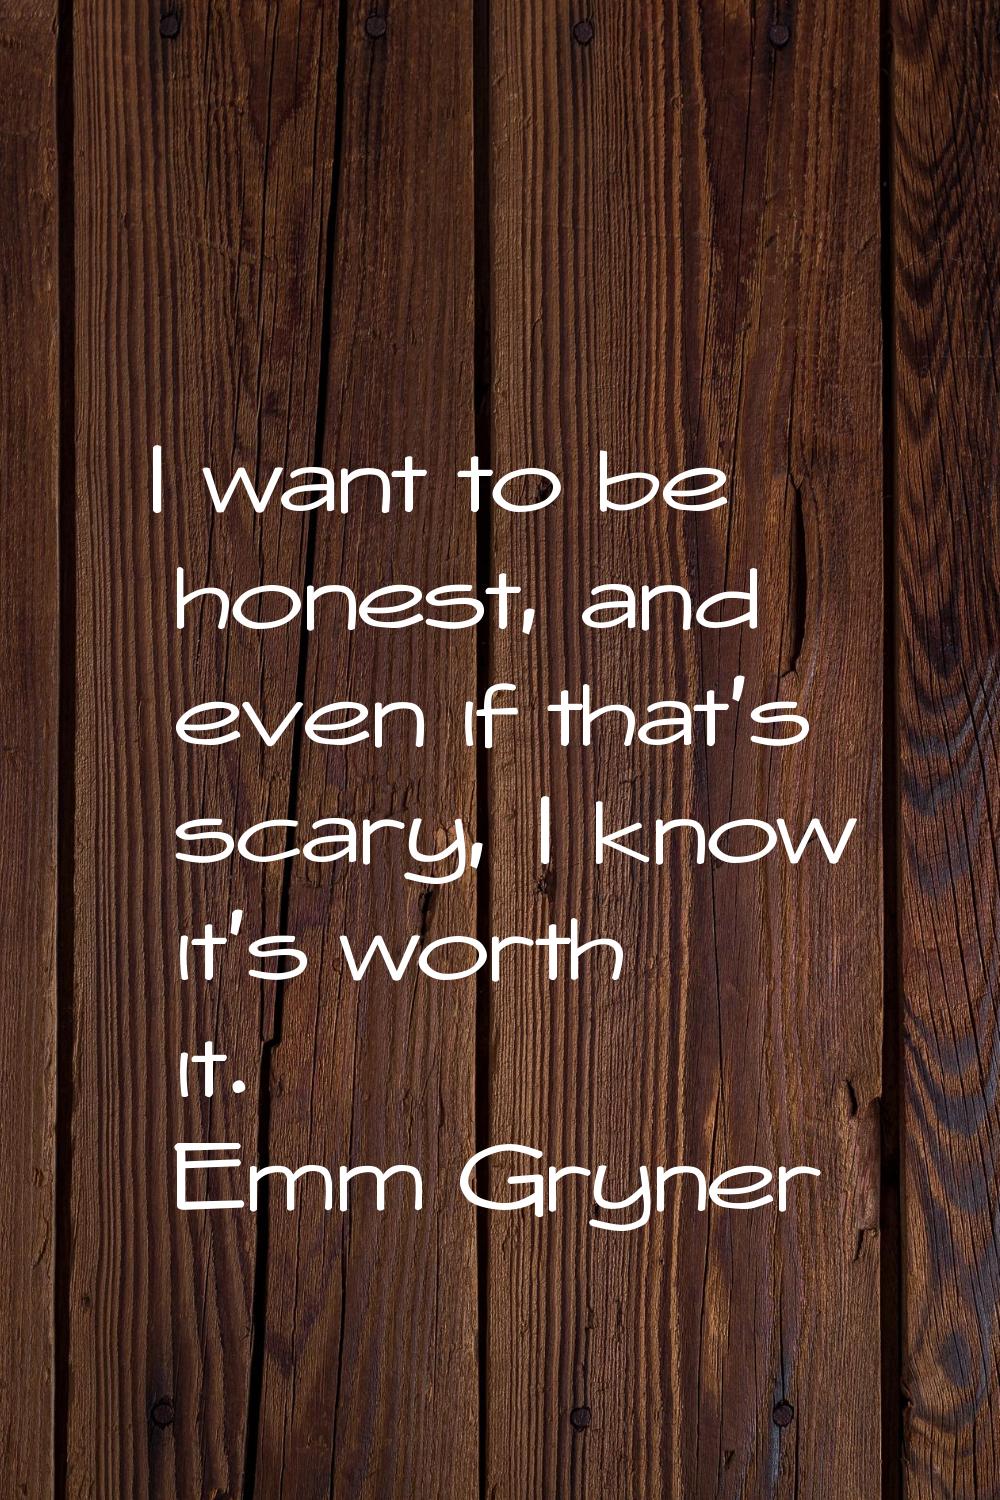 I want to be honest, and even if that's scary, I know it's worth it.